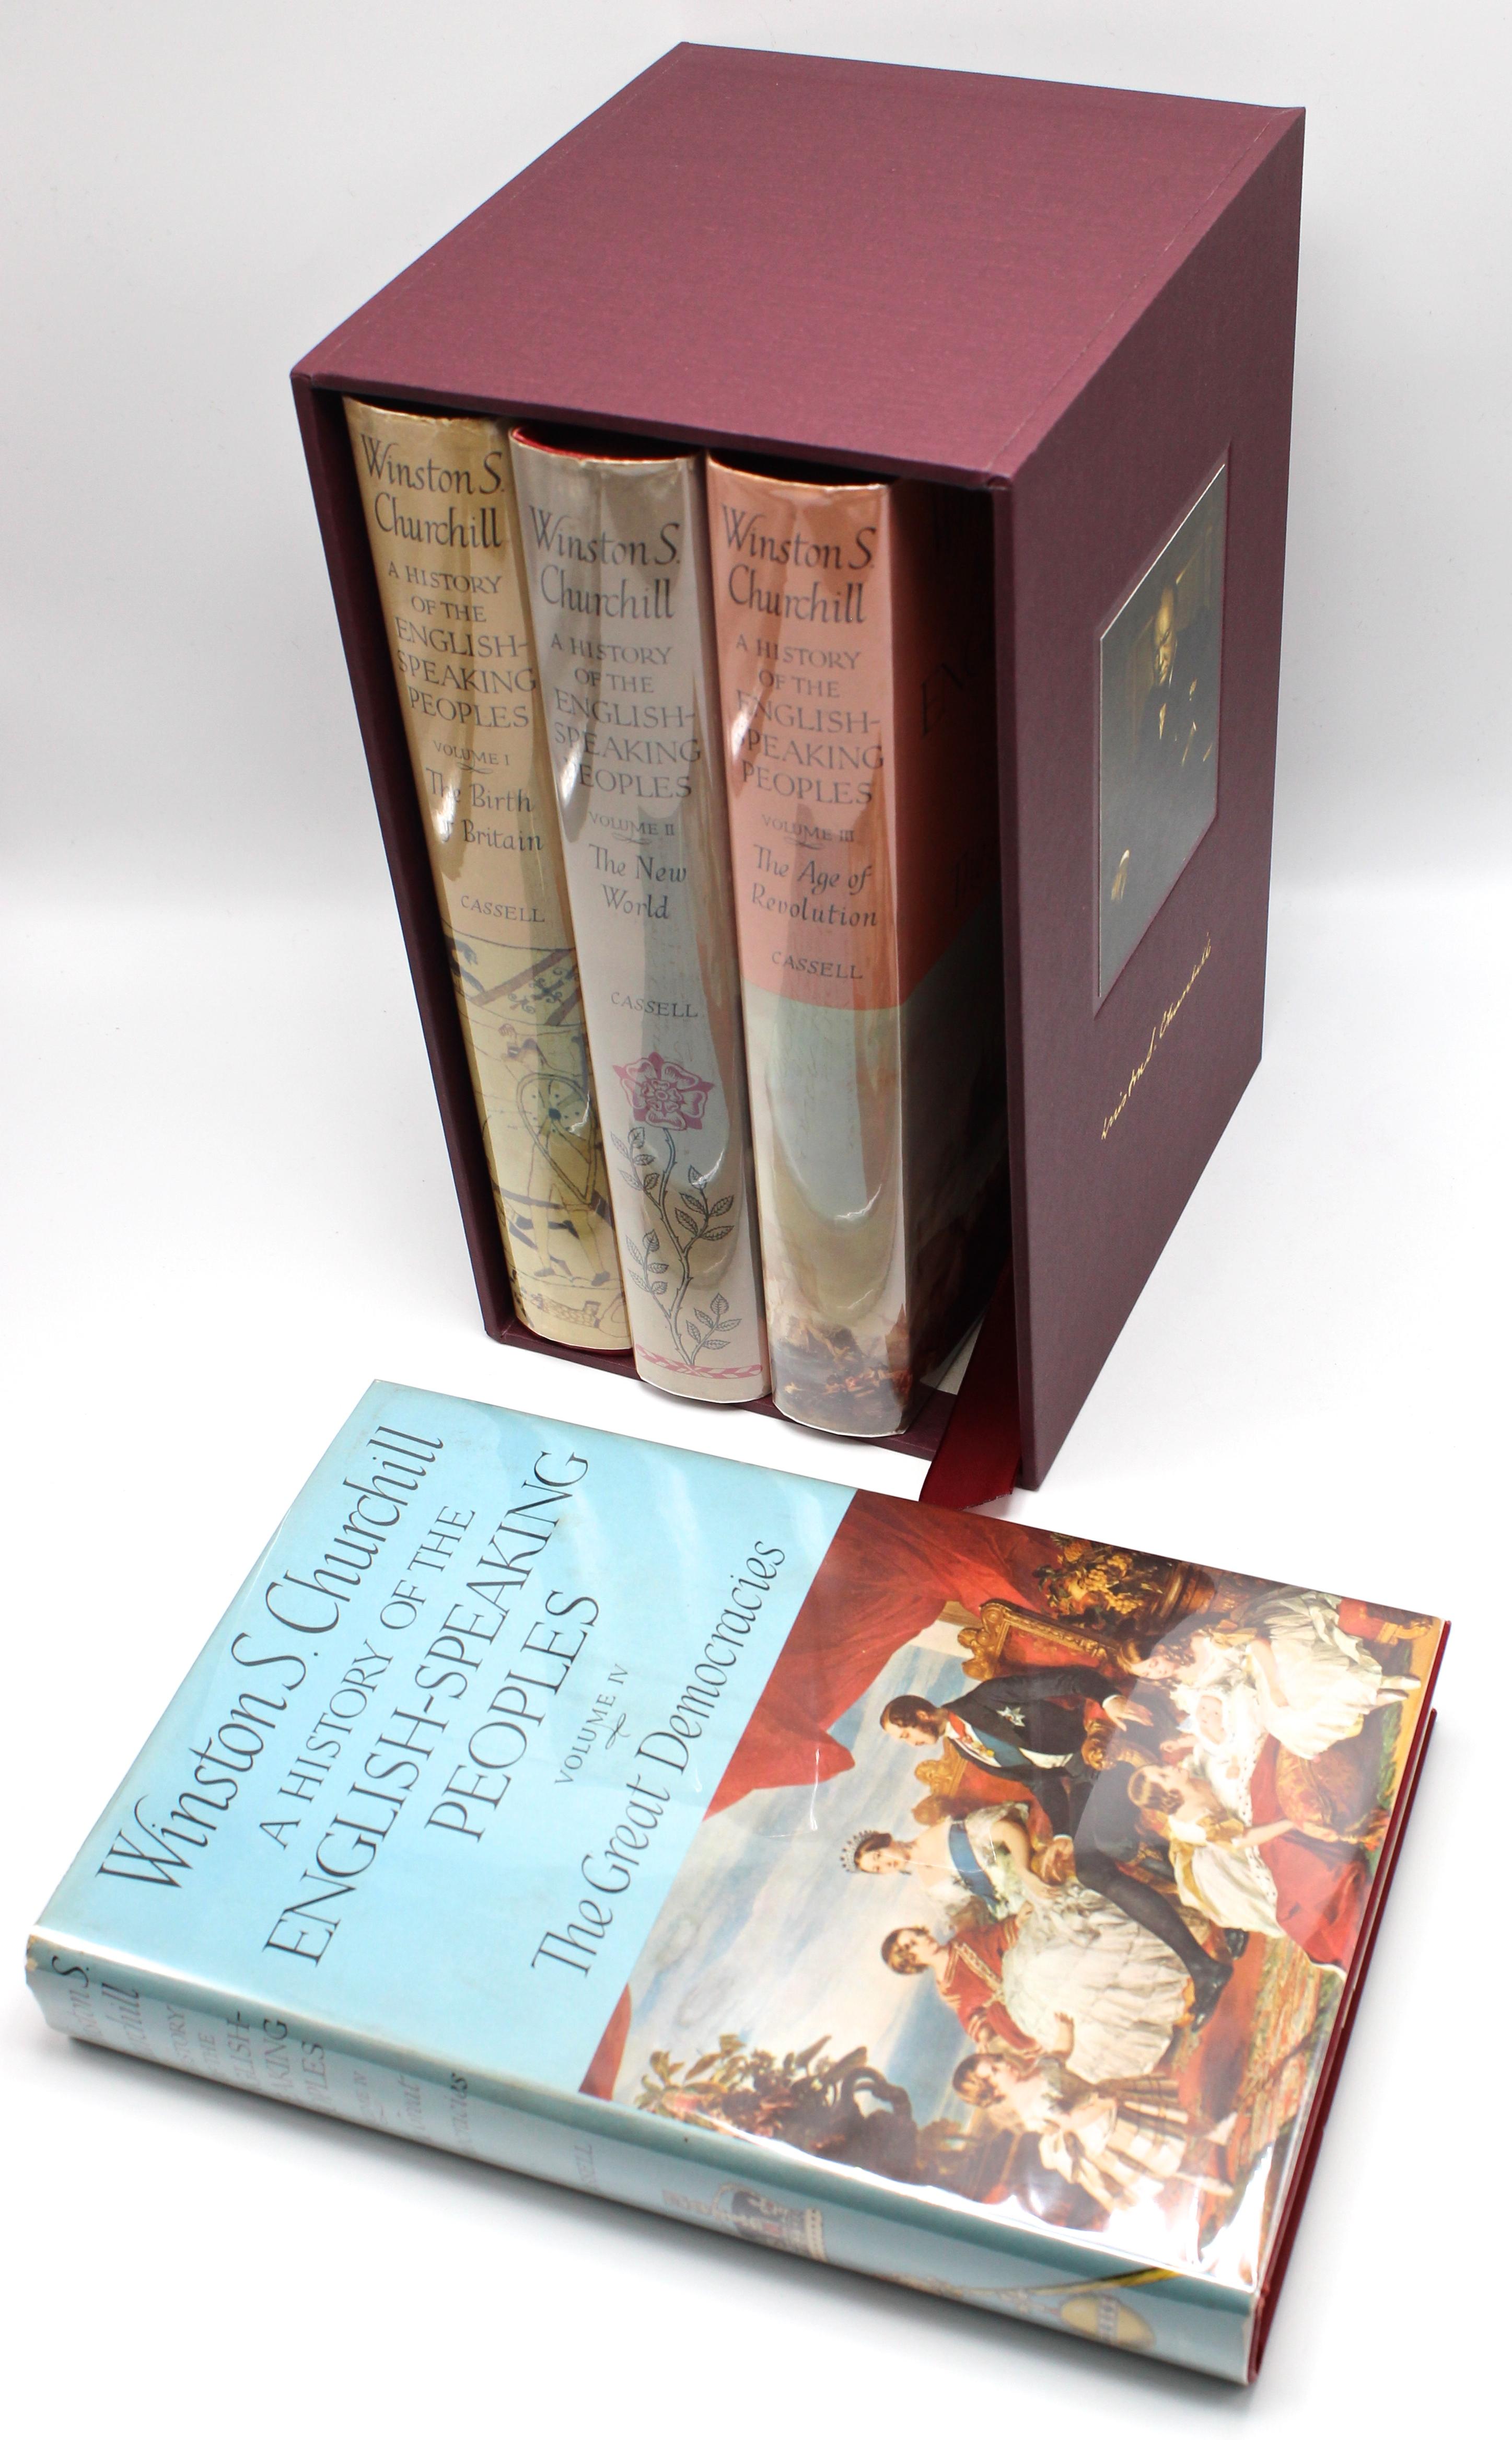 Churchill, Winston. A History of the English-Speaking Peoples. London: Cassell & Company Ltd., 1956-1958. First Edition, four volume set. Features all original dust jackets and is presented in a custom made archival slipcase.

These stated first